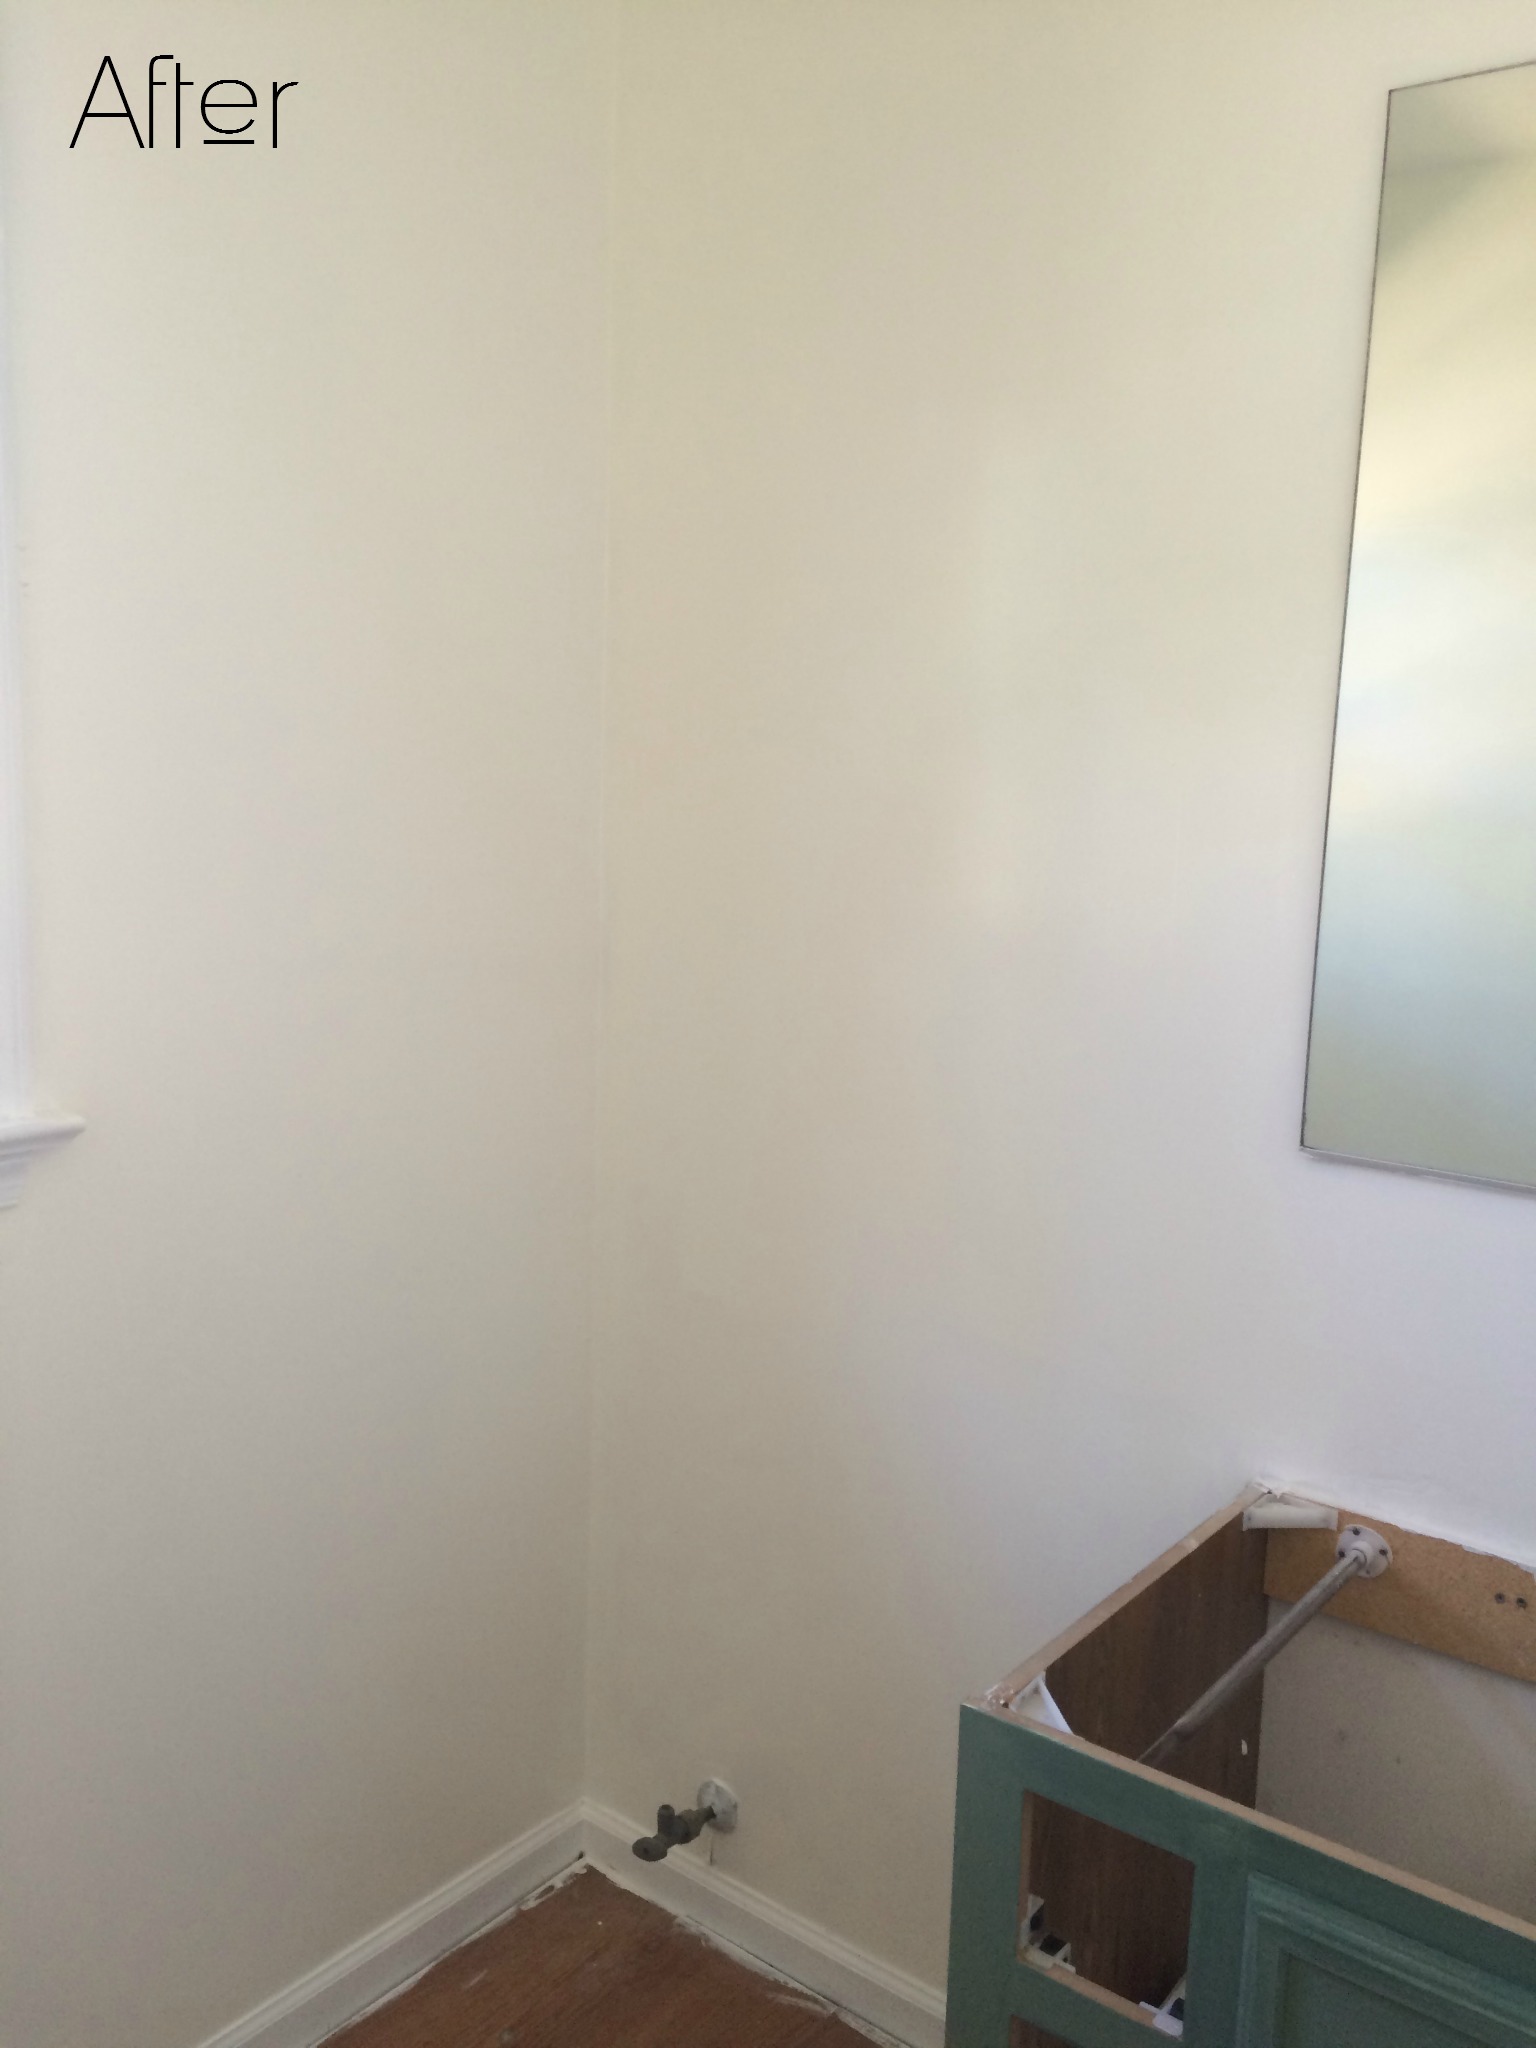 Primer To Paint Over Wallpaper On